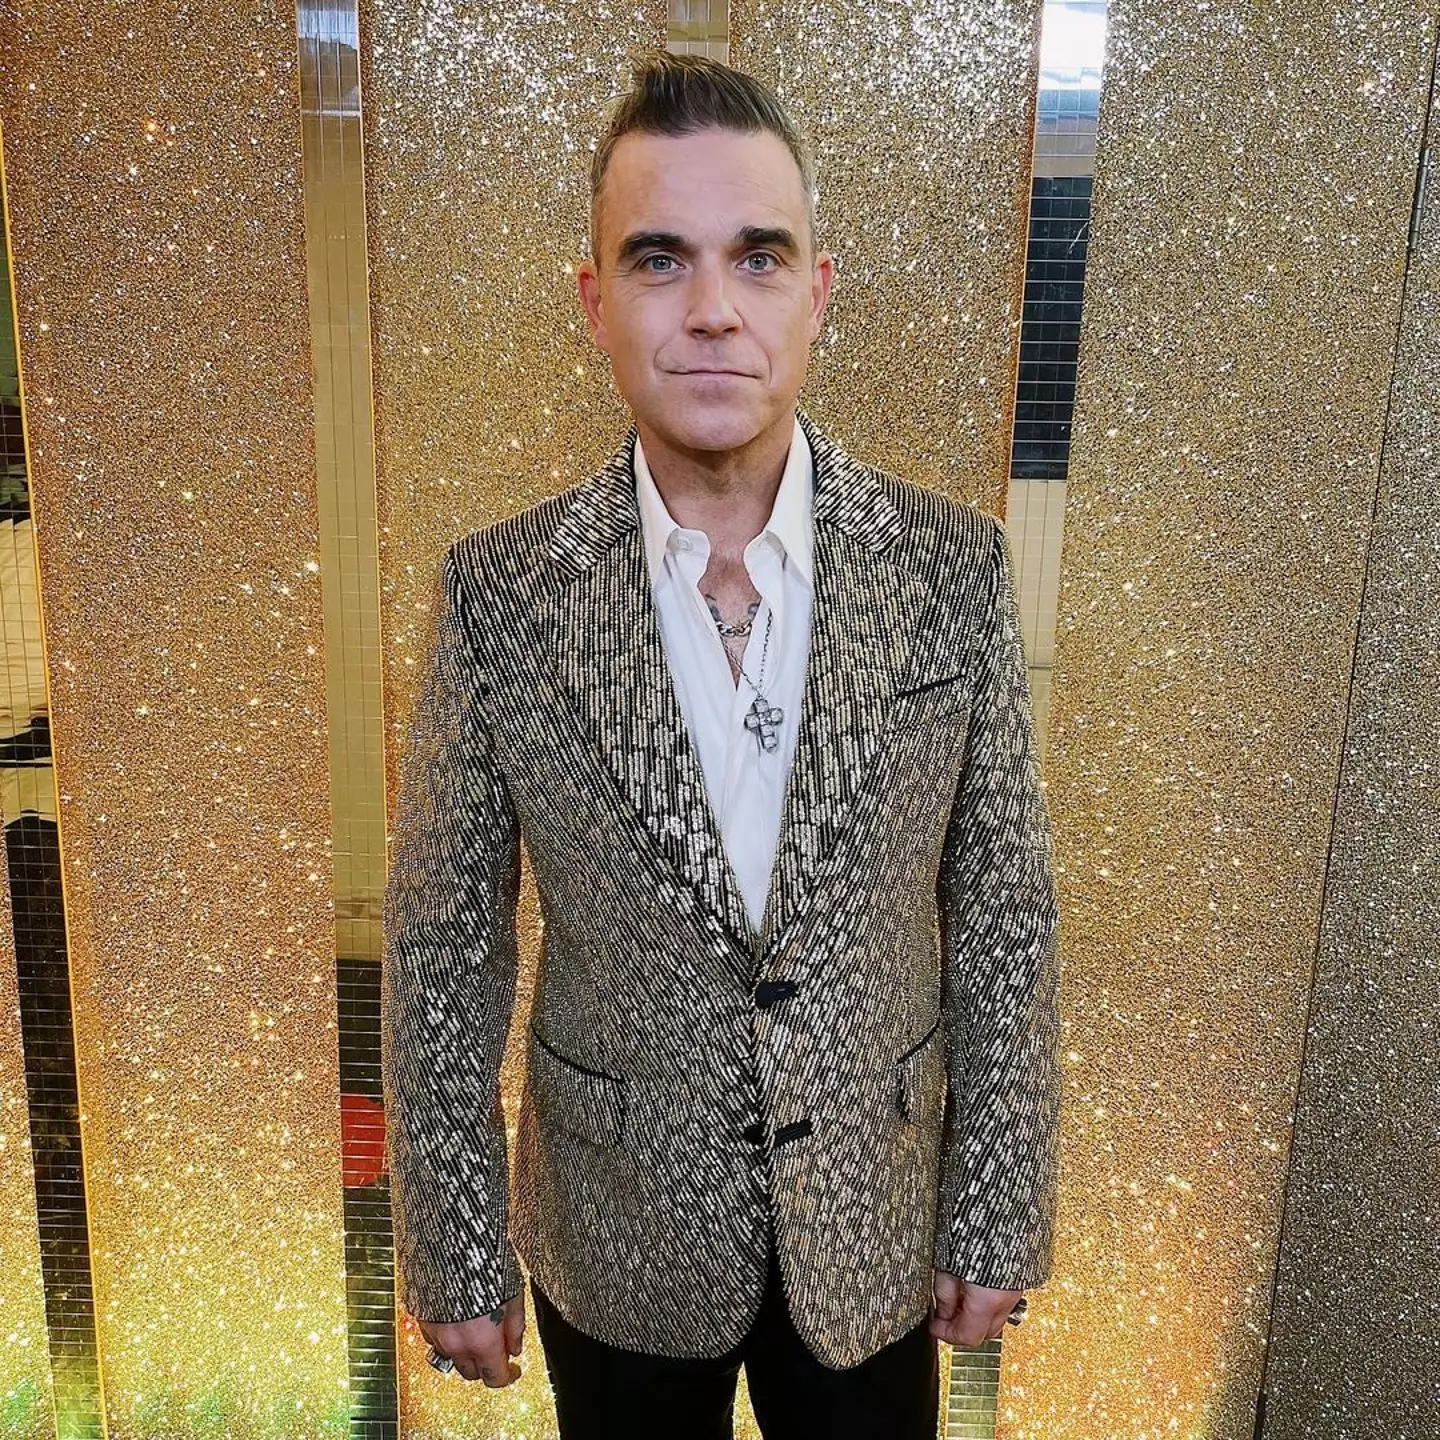 Robbie Williams spotted a bizarre coincidence at his gig.